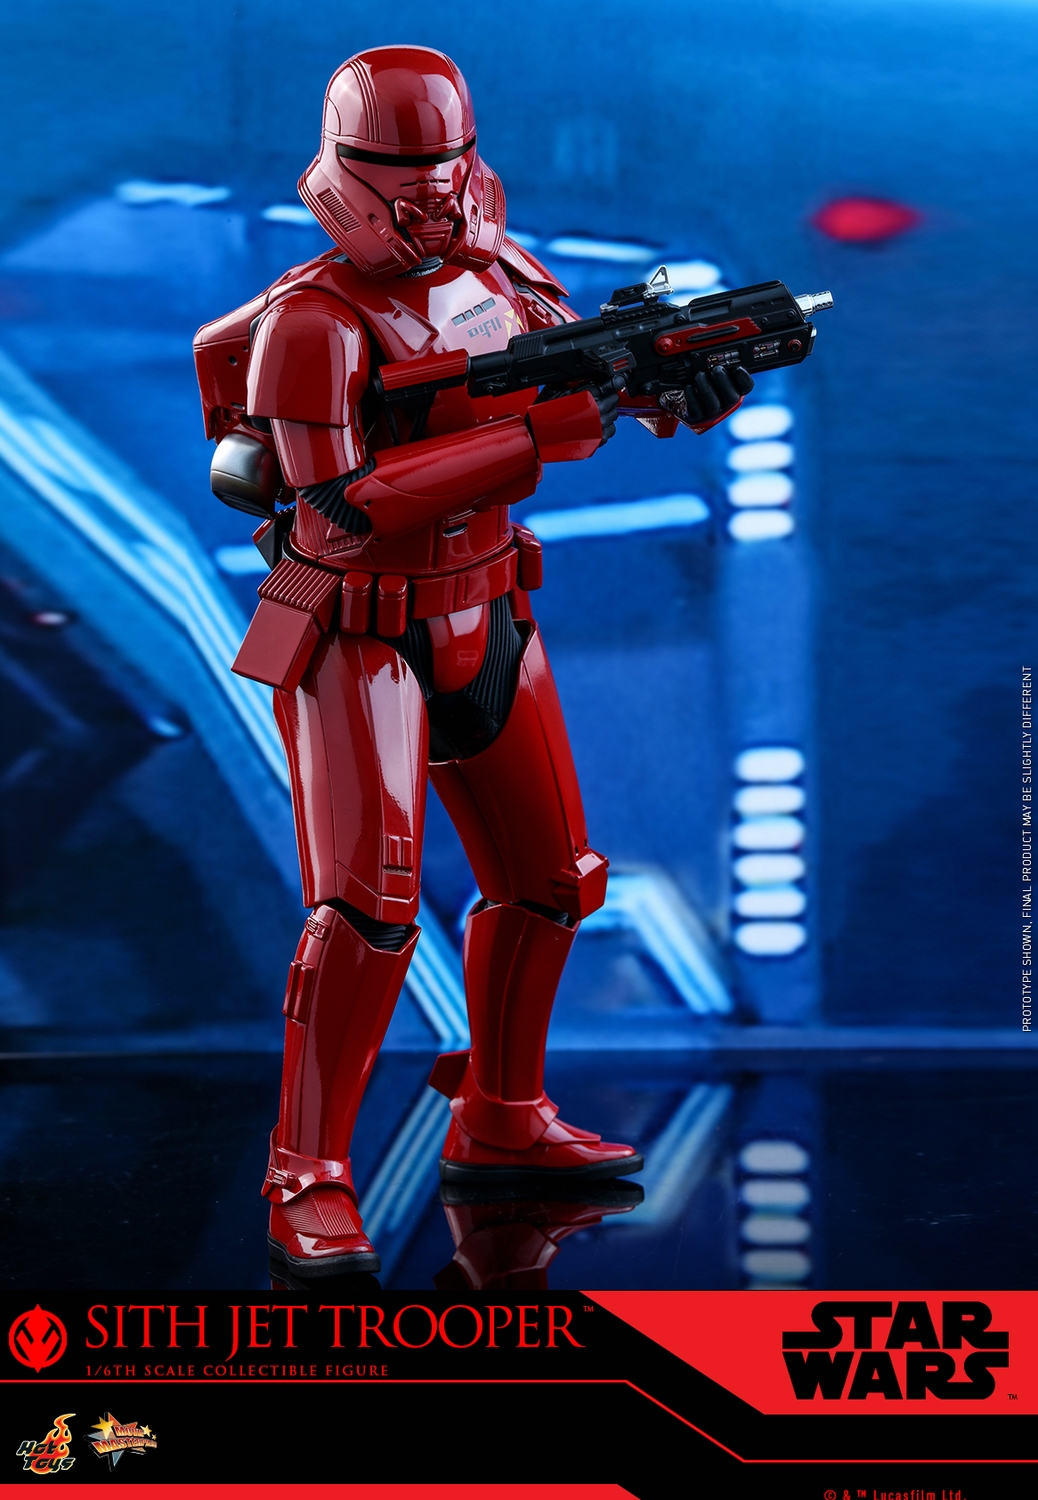 hot-toys-sith-jet-trooper-collectible-figure-121219-001.jpg